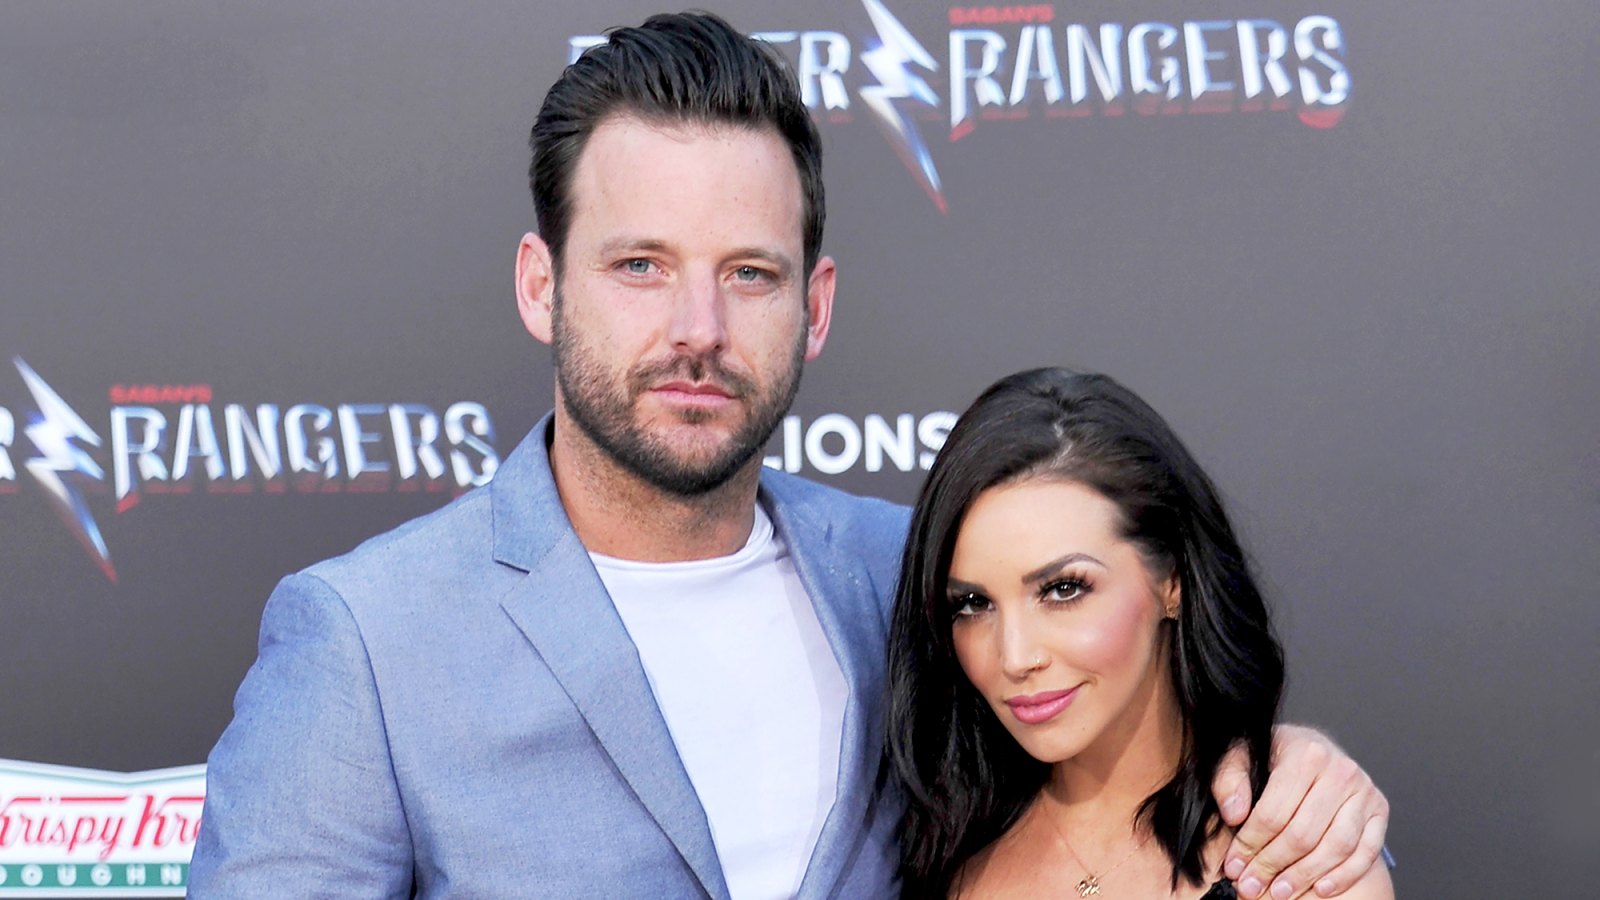 Scheana Shay and Robert Valletta arrives at the 2017 premiere of Lionsgate's "Power Rangers" at The Village Theatre in Westwood, California.